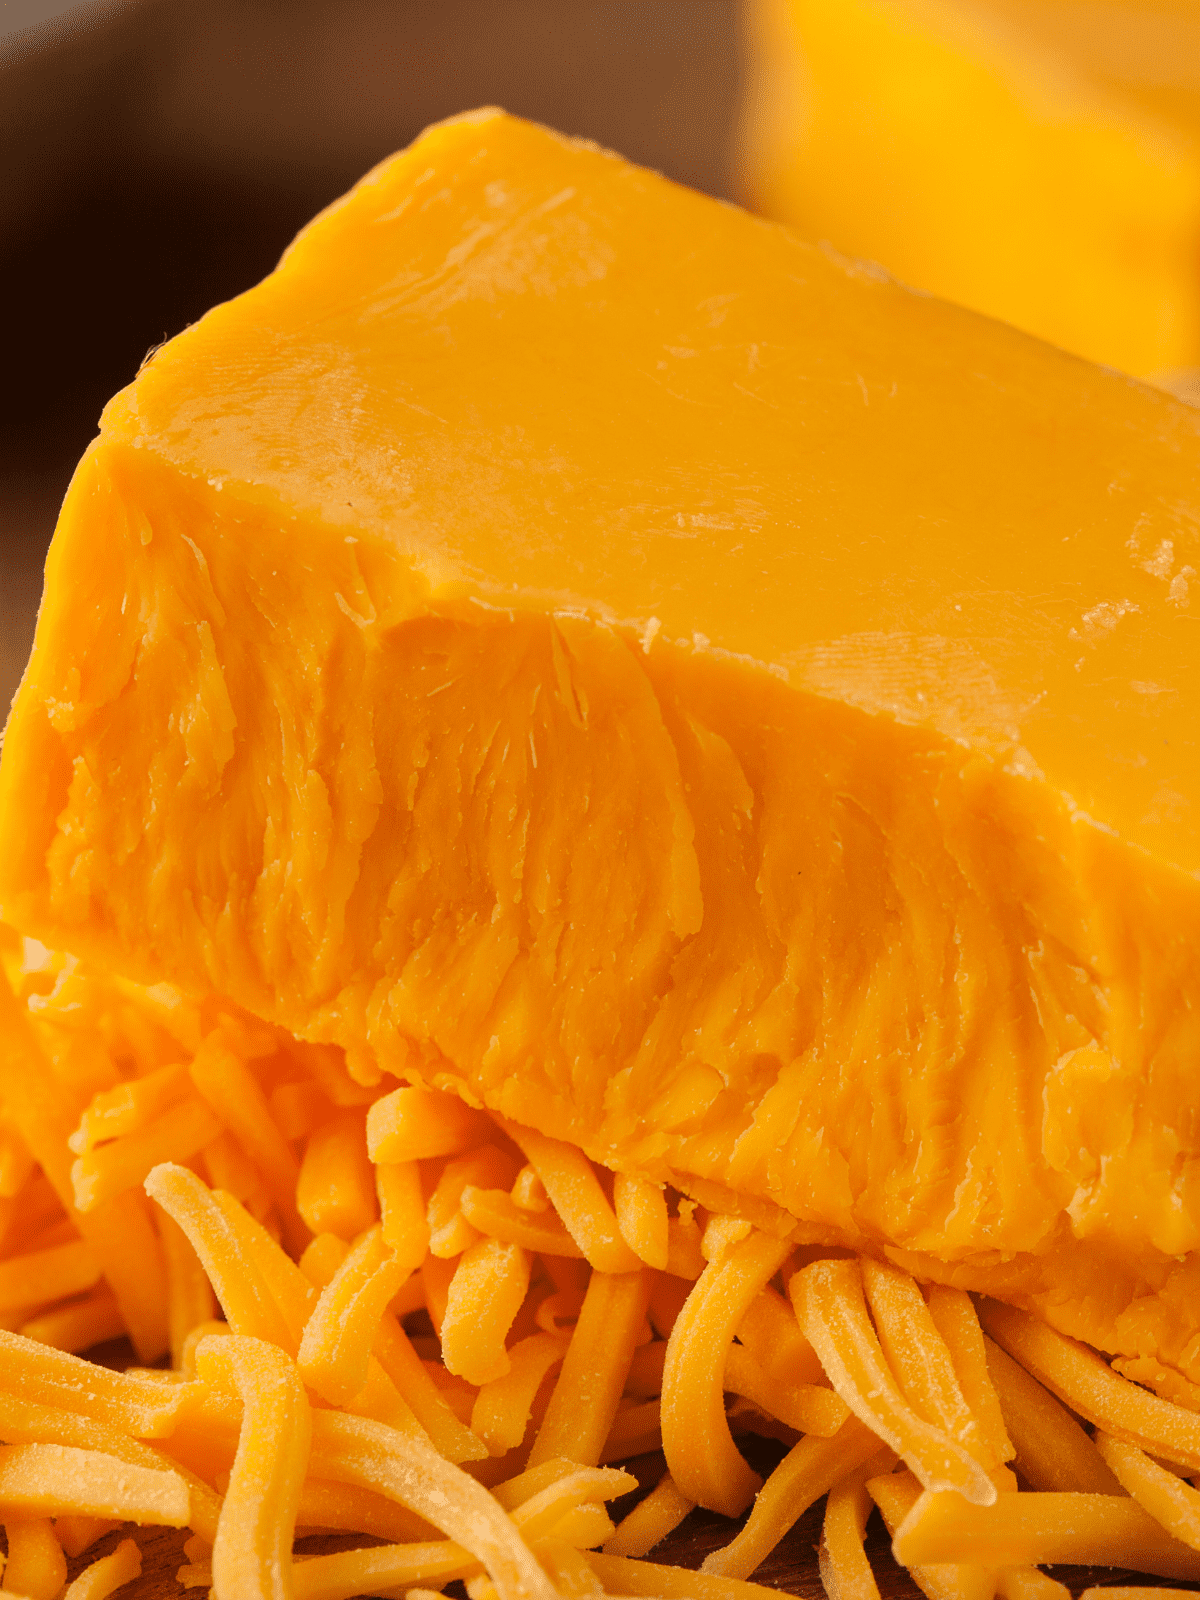 A block of cheddar with some shredded off of it.